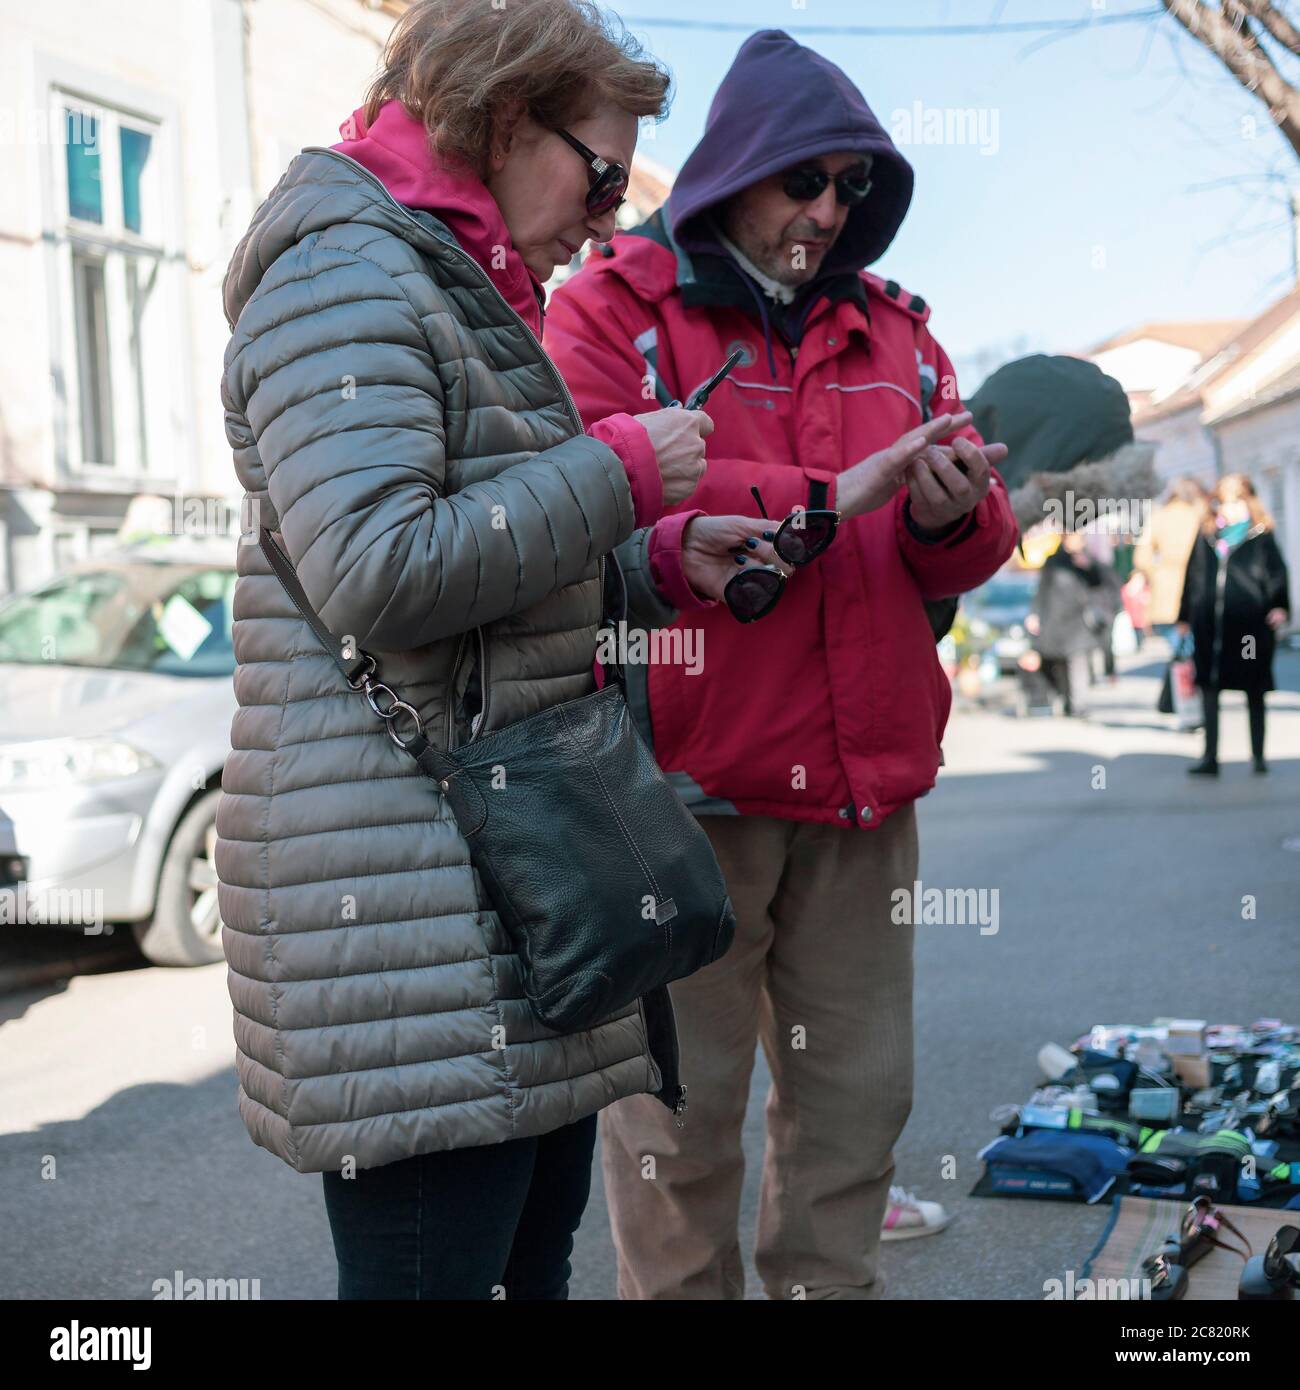 Belgrade, Serbia, Feb 22, 2020: Lady showing interest in sunglasses offered by a street vendor Stock Photo